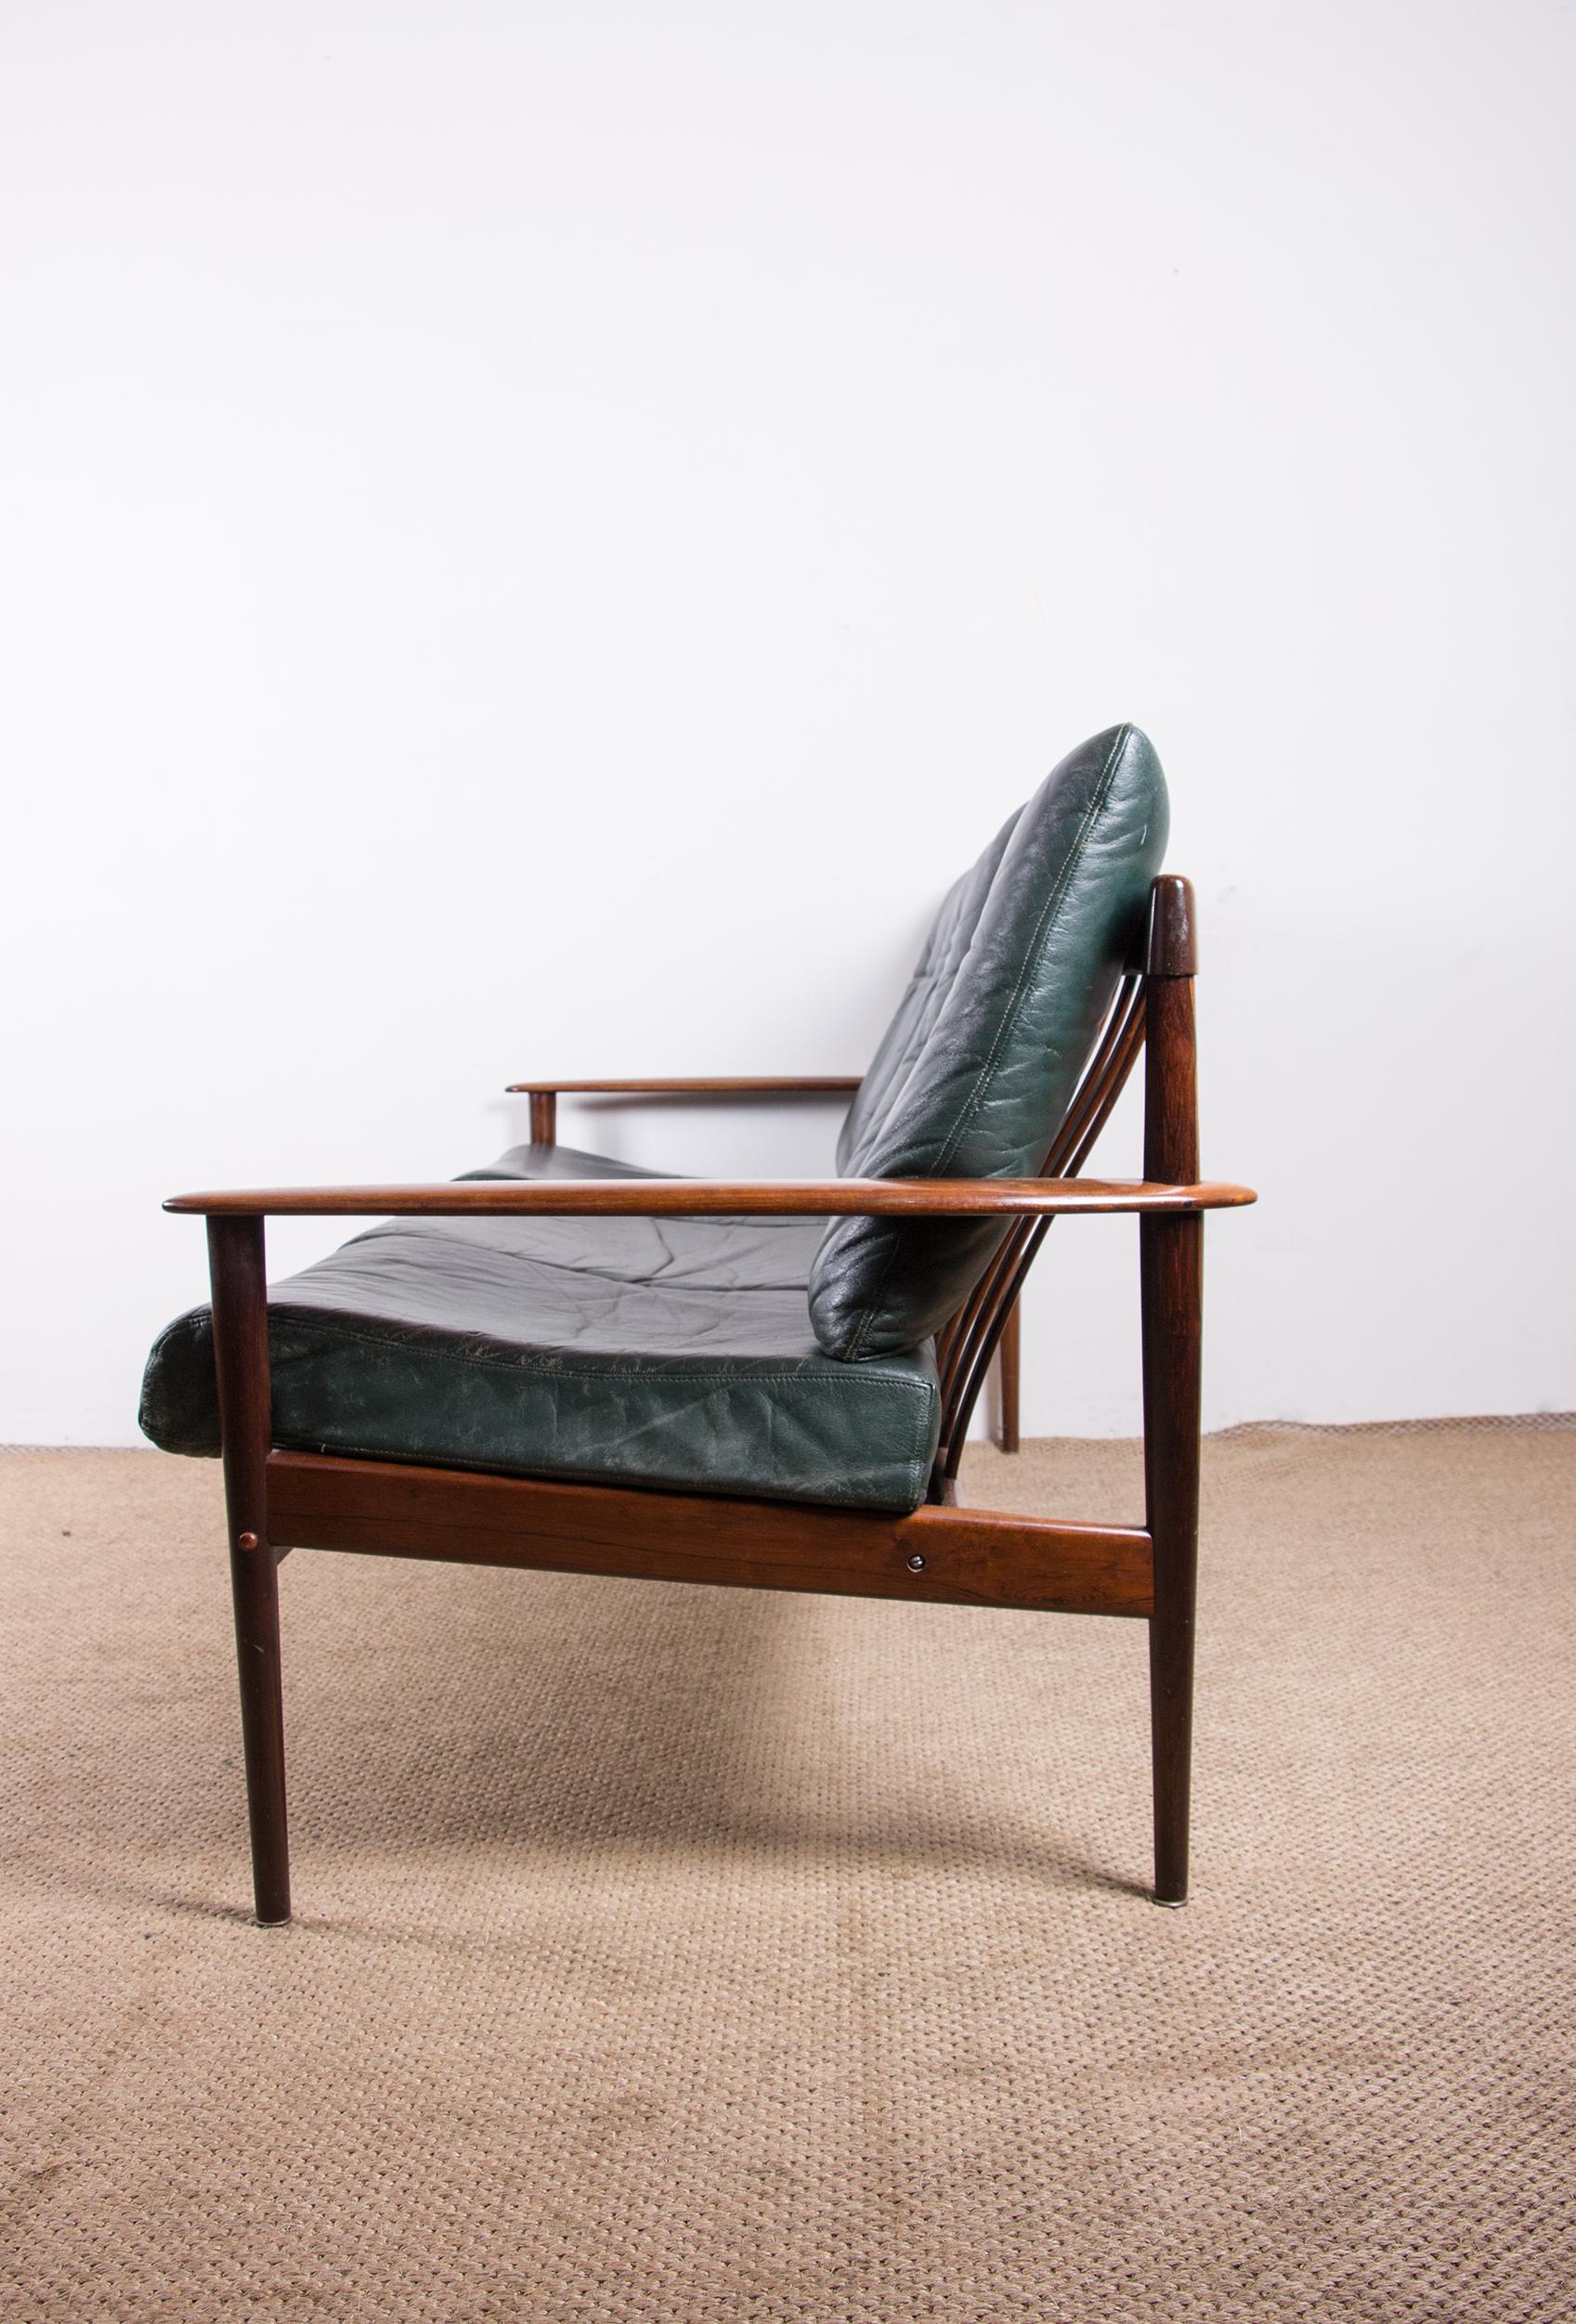 Danish 3 seater sofa, Rosewood and Leather by Grete Jalk for Poul Jepessen 1960. 12